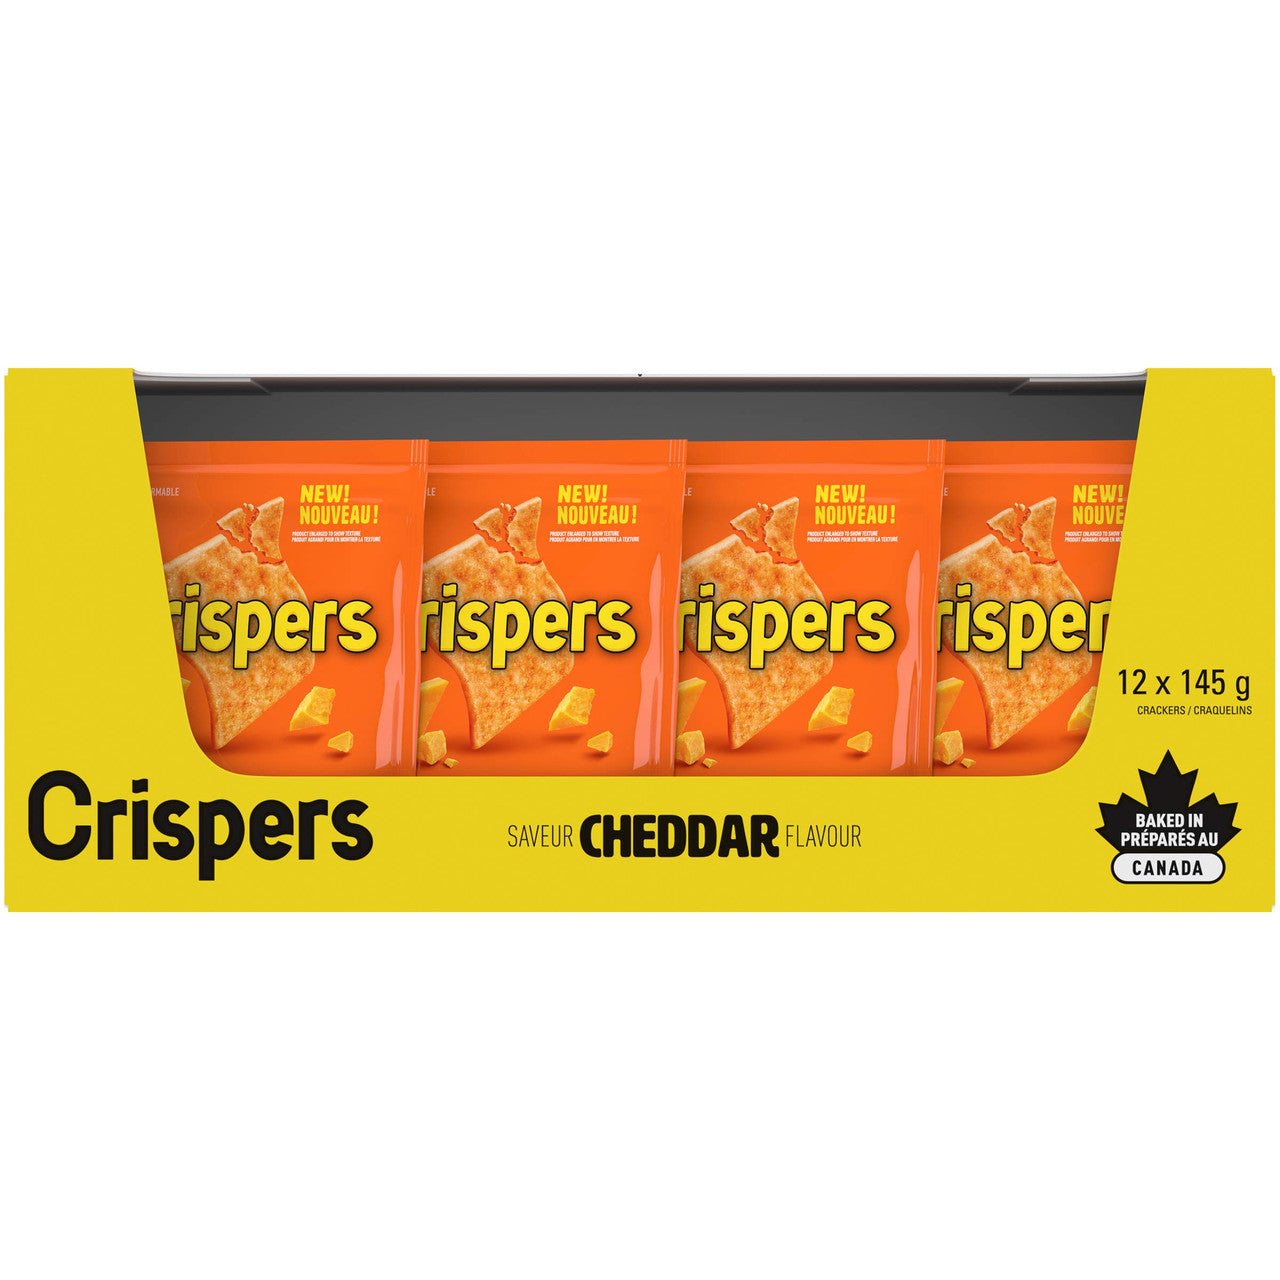 Christie Crispers, Cheddar Crackers, 145g/5.1 Ounce, (12 Pack), {Imported from Canada}